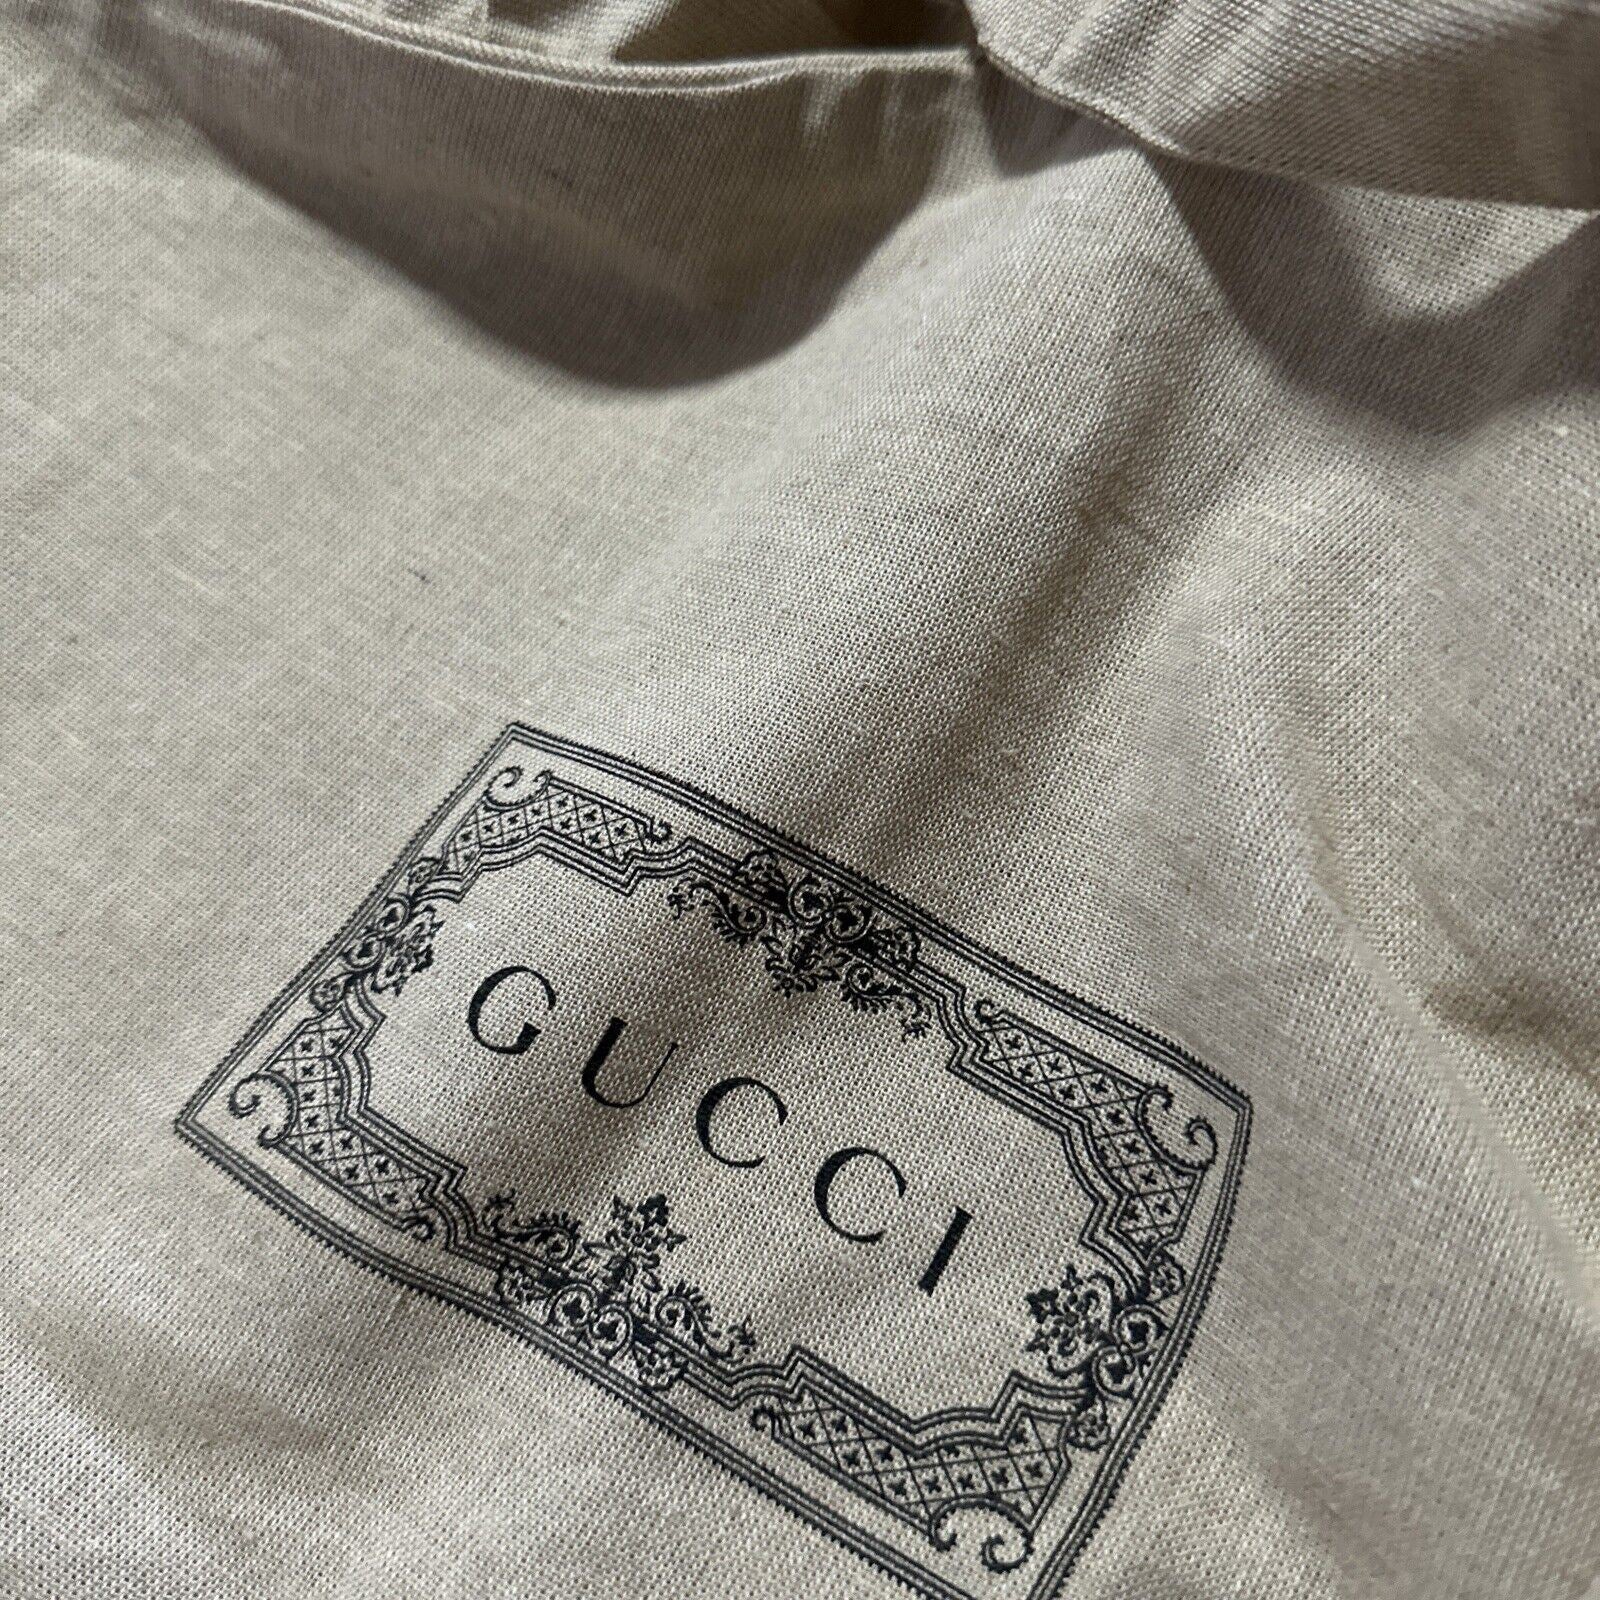 Brand New Gucci Garment Suit,  Any Clothing Unisex LT Brown Bag